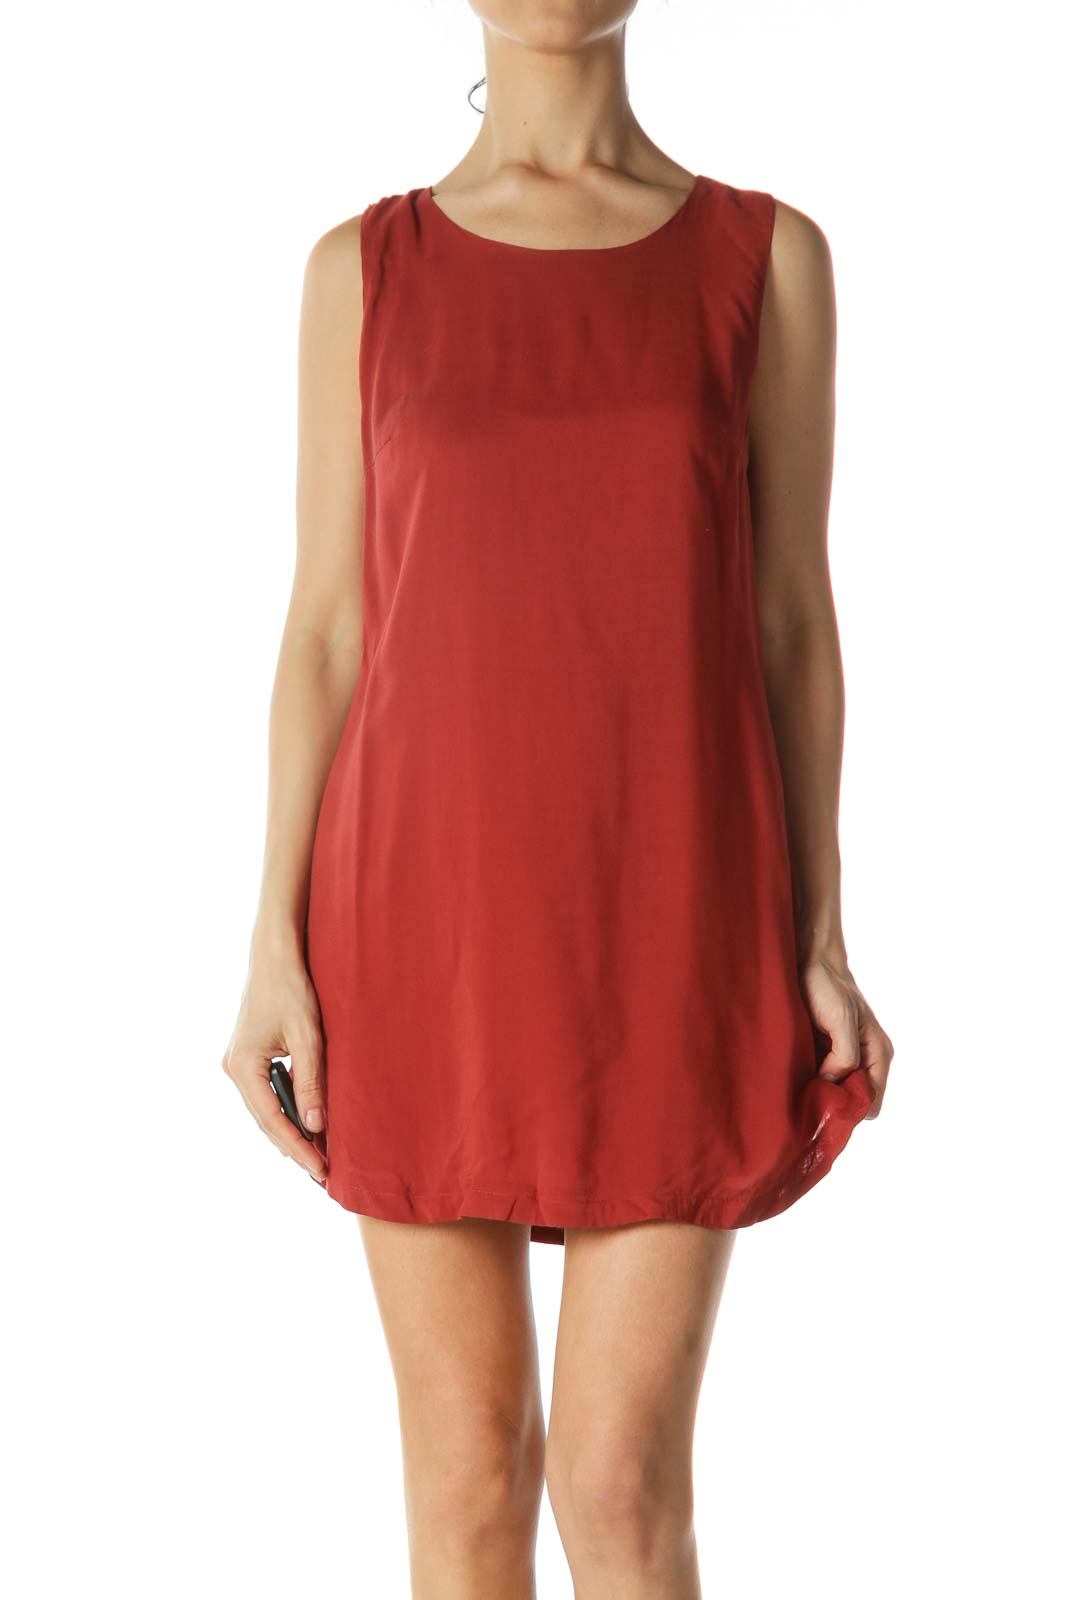 Brick Red Open Side A-Line Day Dress Front